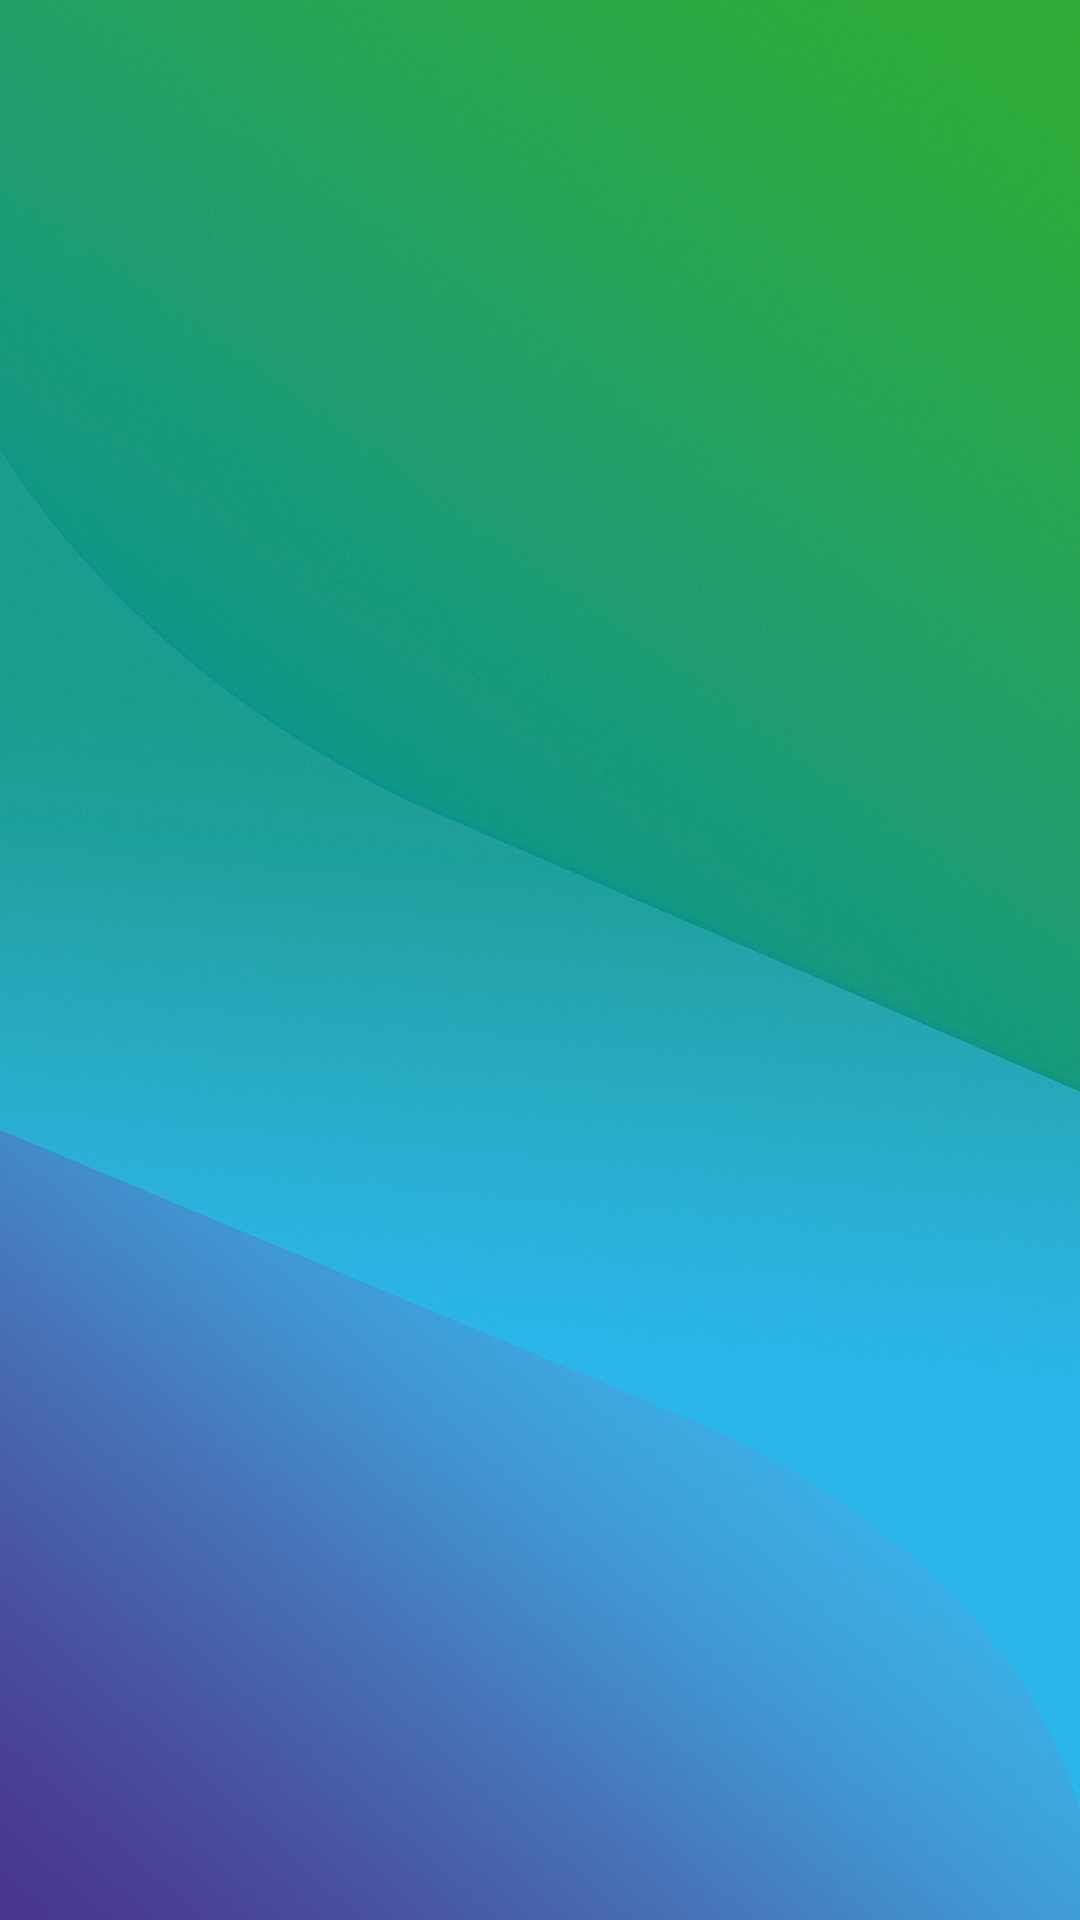 Oppo F9 Wallpapers HD